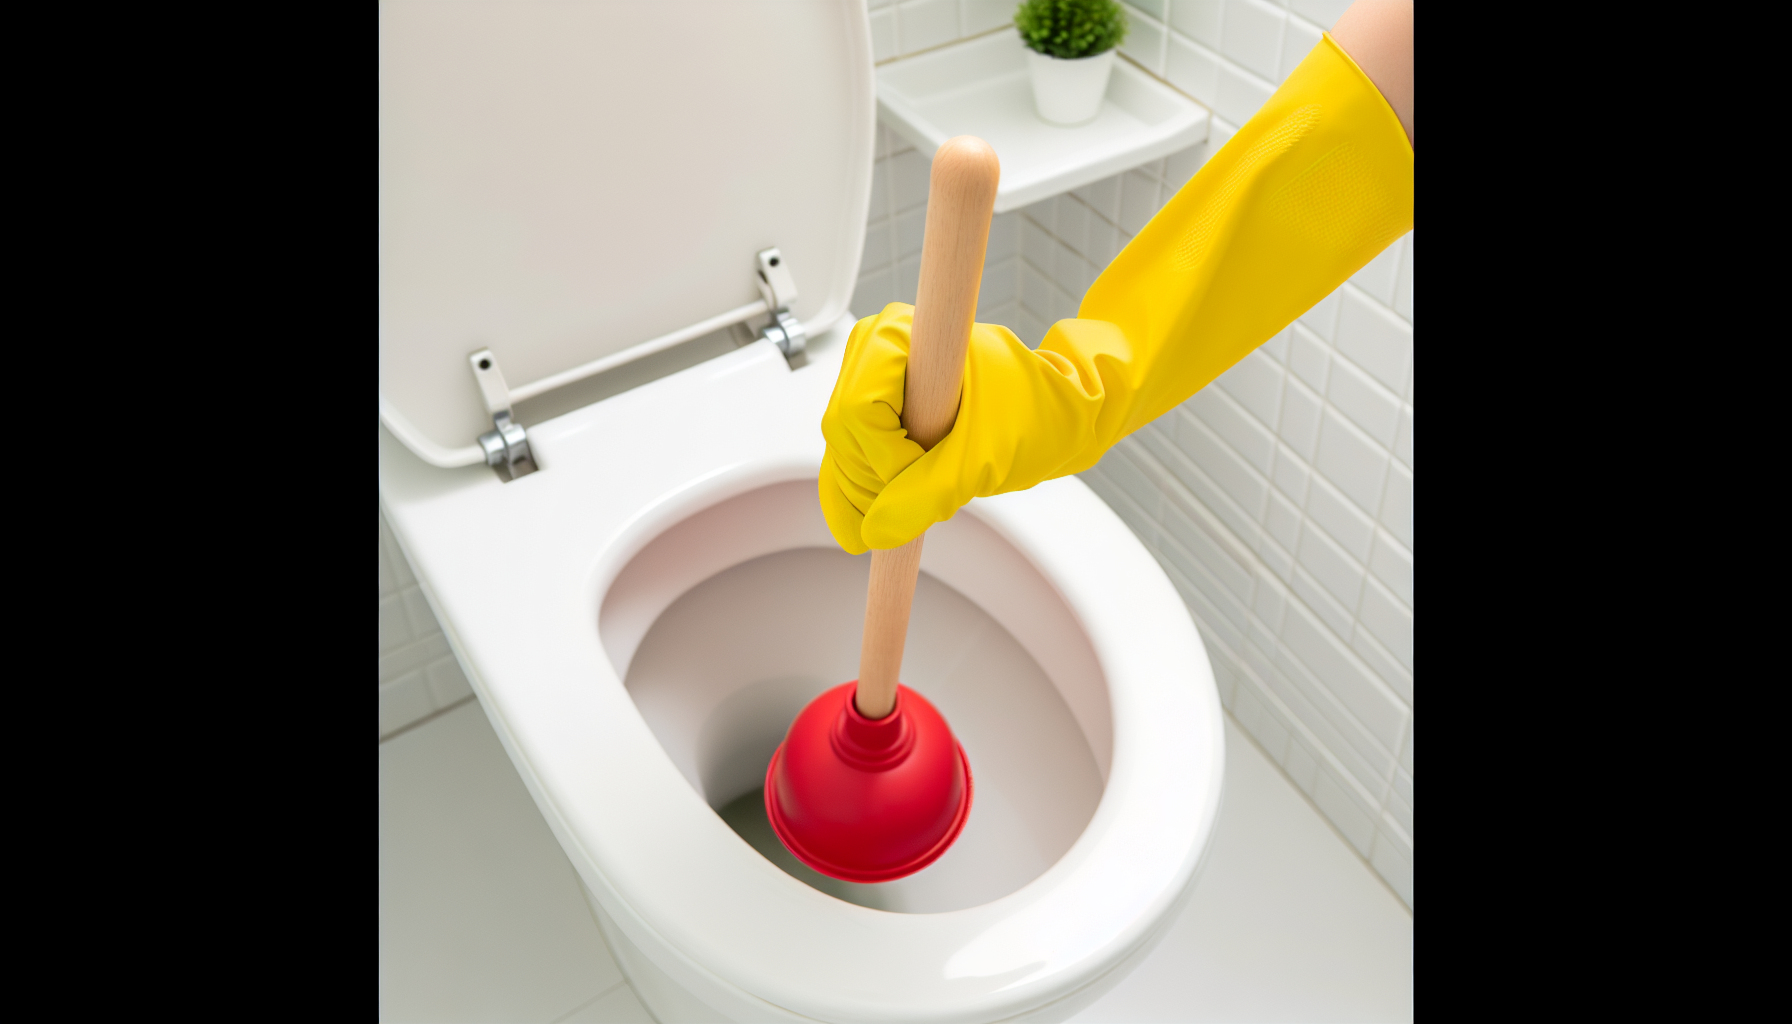 Person using a plunger to clear a toilet clog